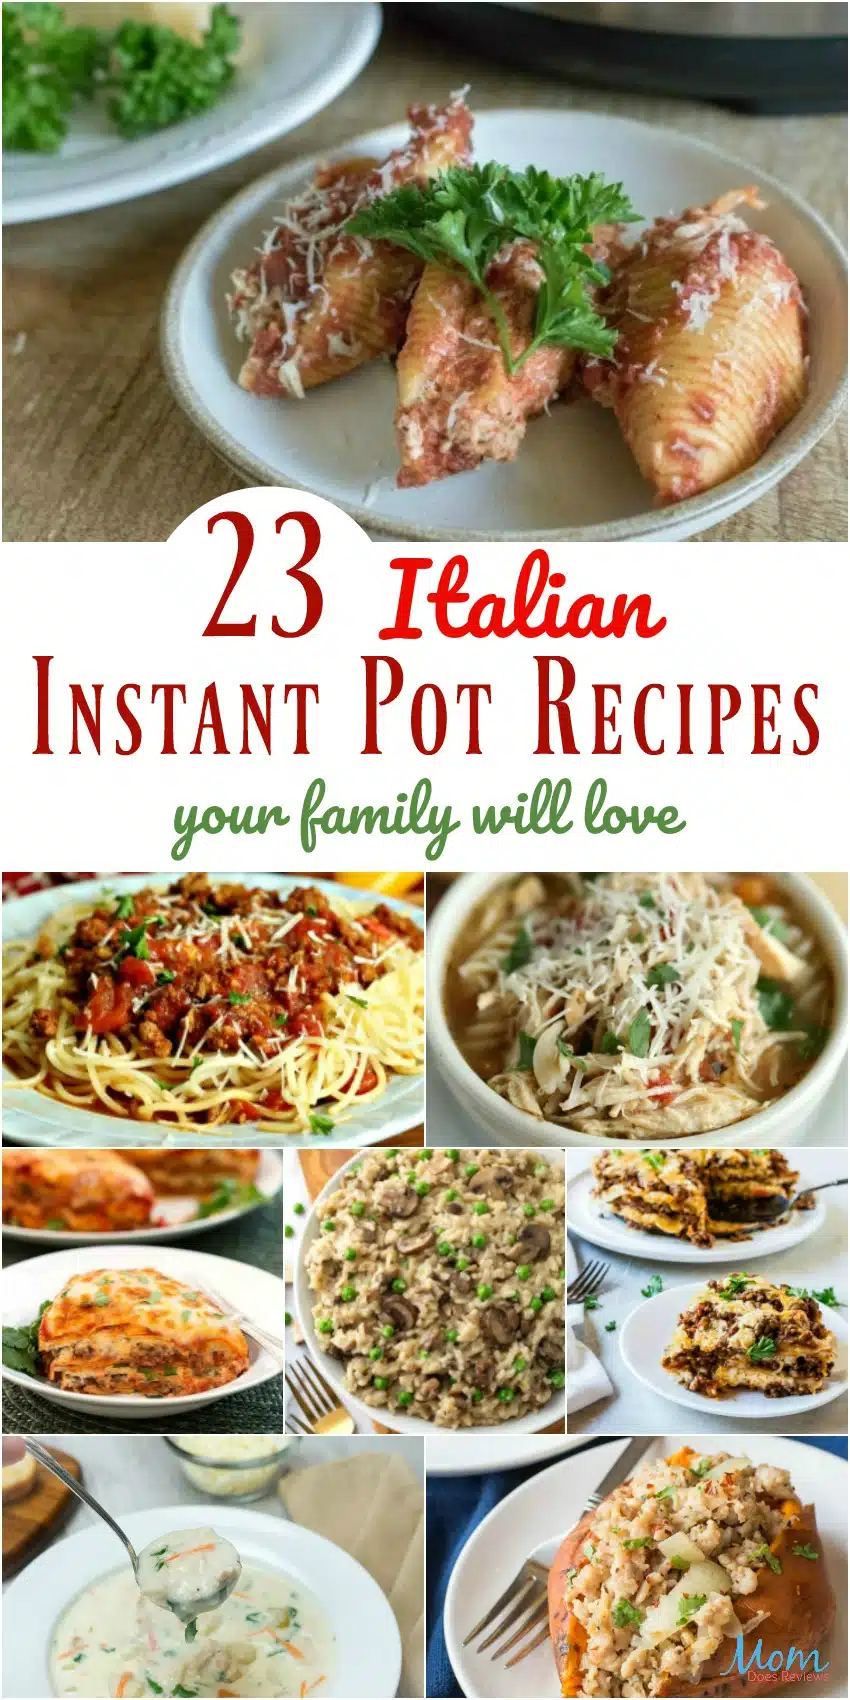 23 Easy Italian Instant Pot Recipes your Family Will Love #recipes #instantpot #pasta #getinmybelly #foodie